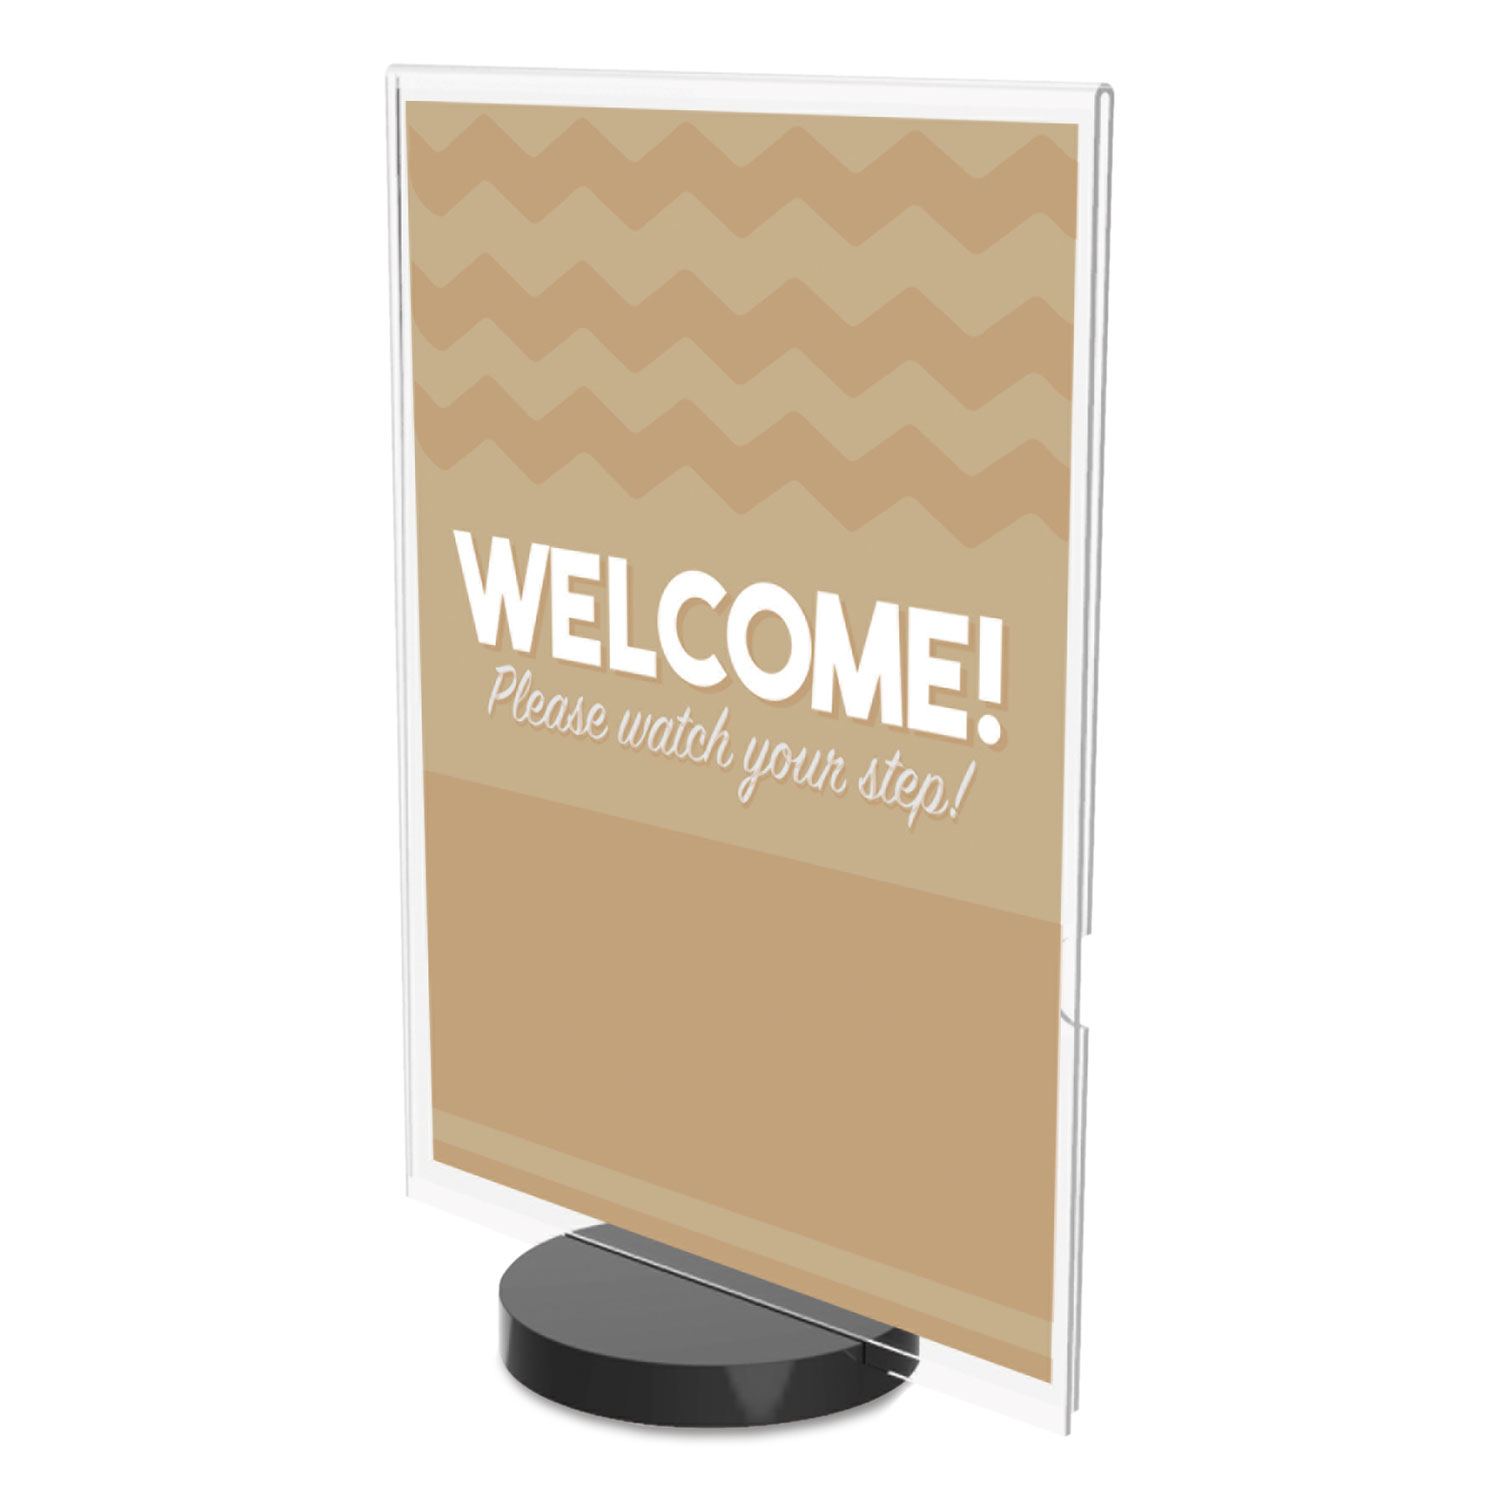 Superior Image Round Base Sign Holder, 5 x 7 Insert, Clear